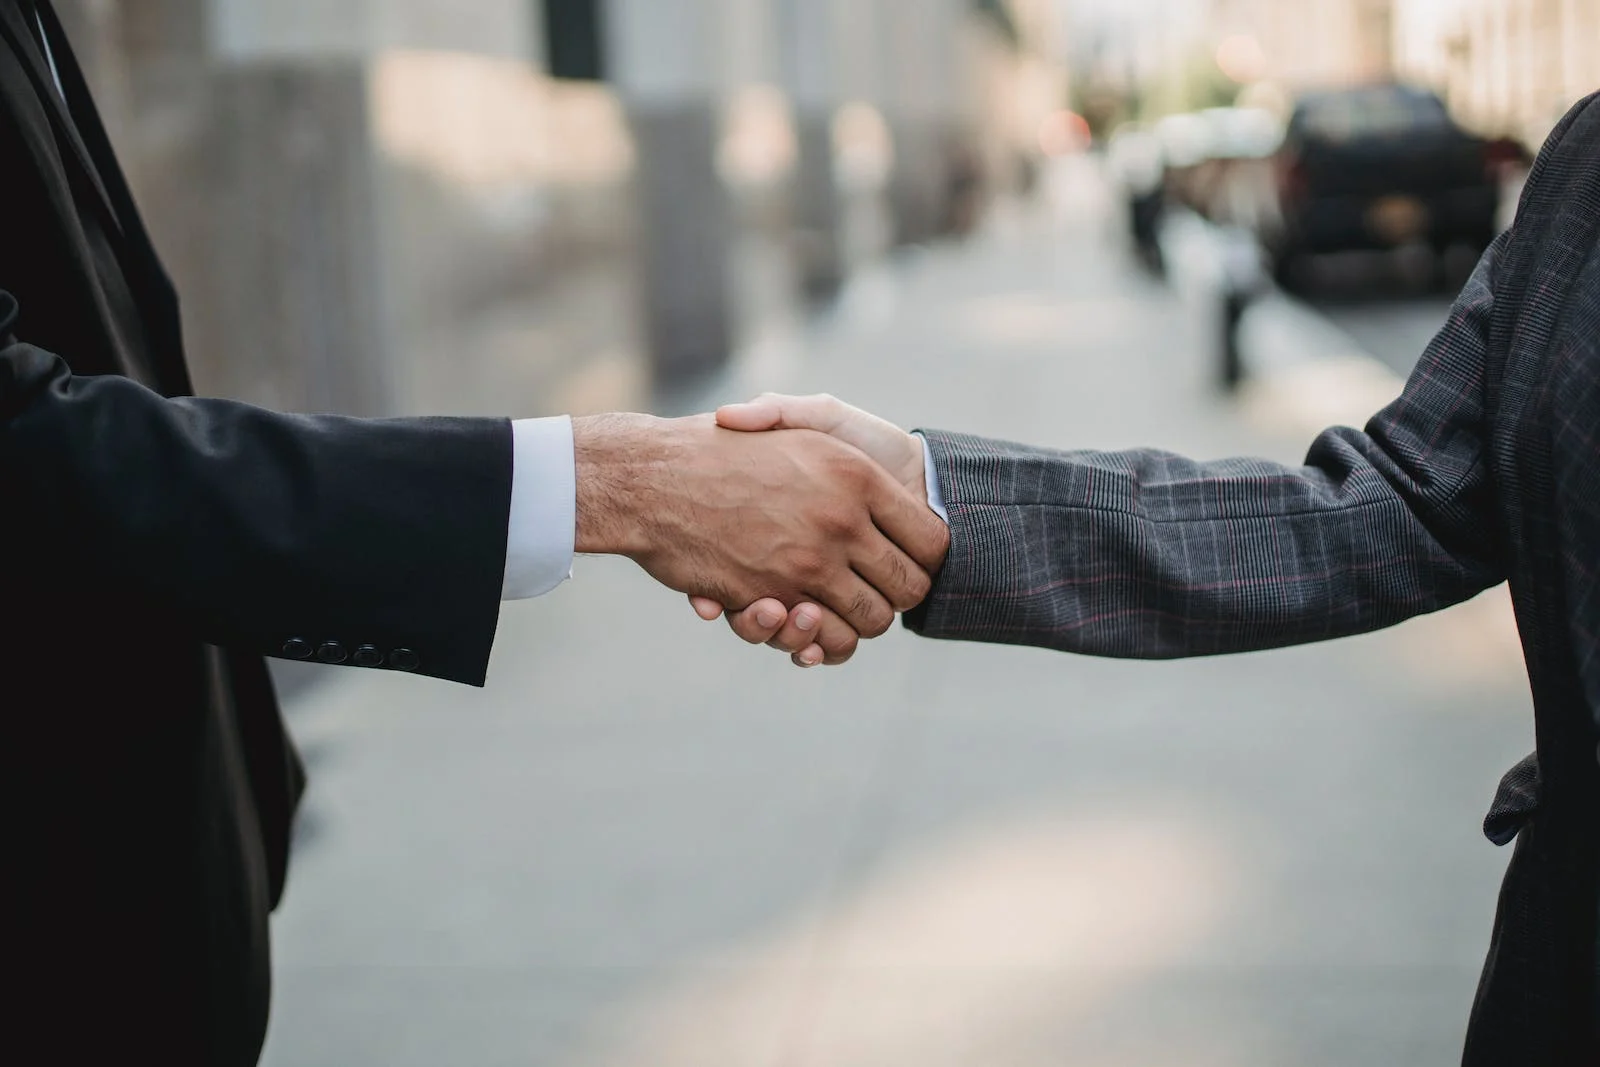 A Person In A Suit Shaking Hands With Another Person In A Suit, Symbolizes The Implementation Of Anti-Corruption Measures